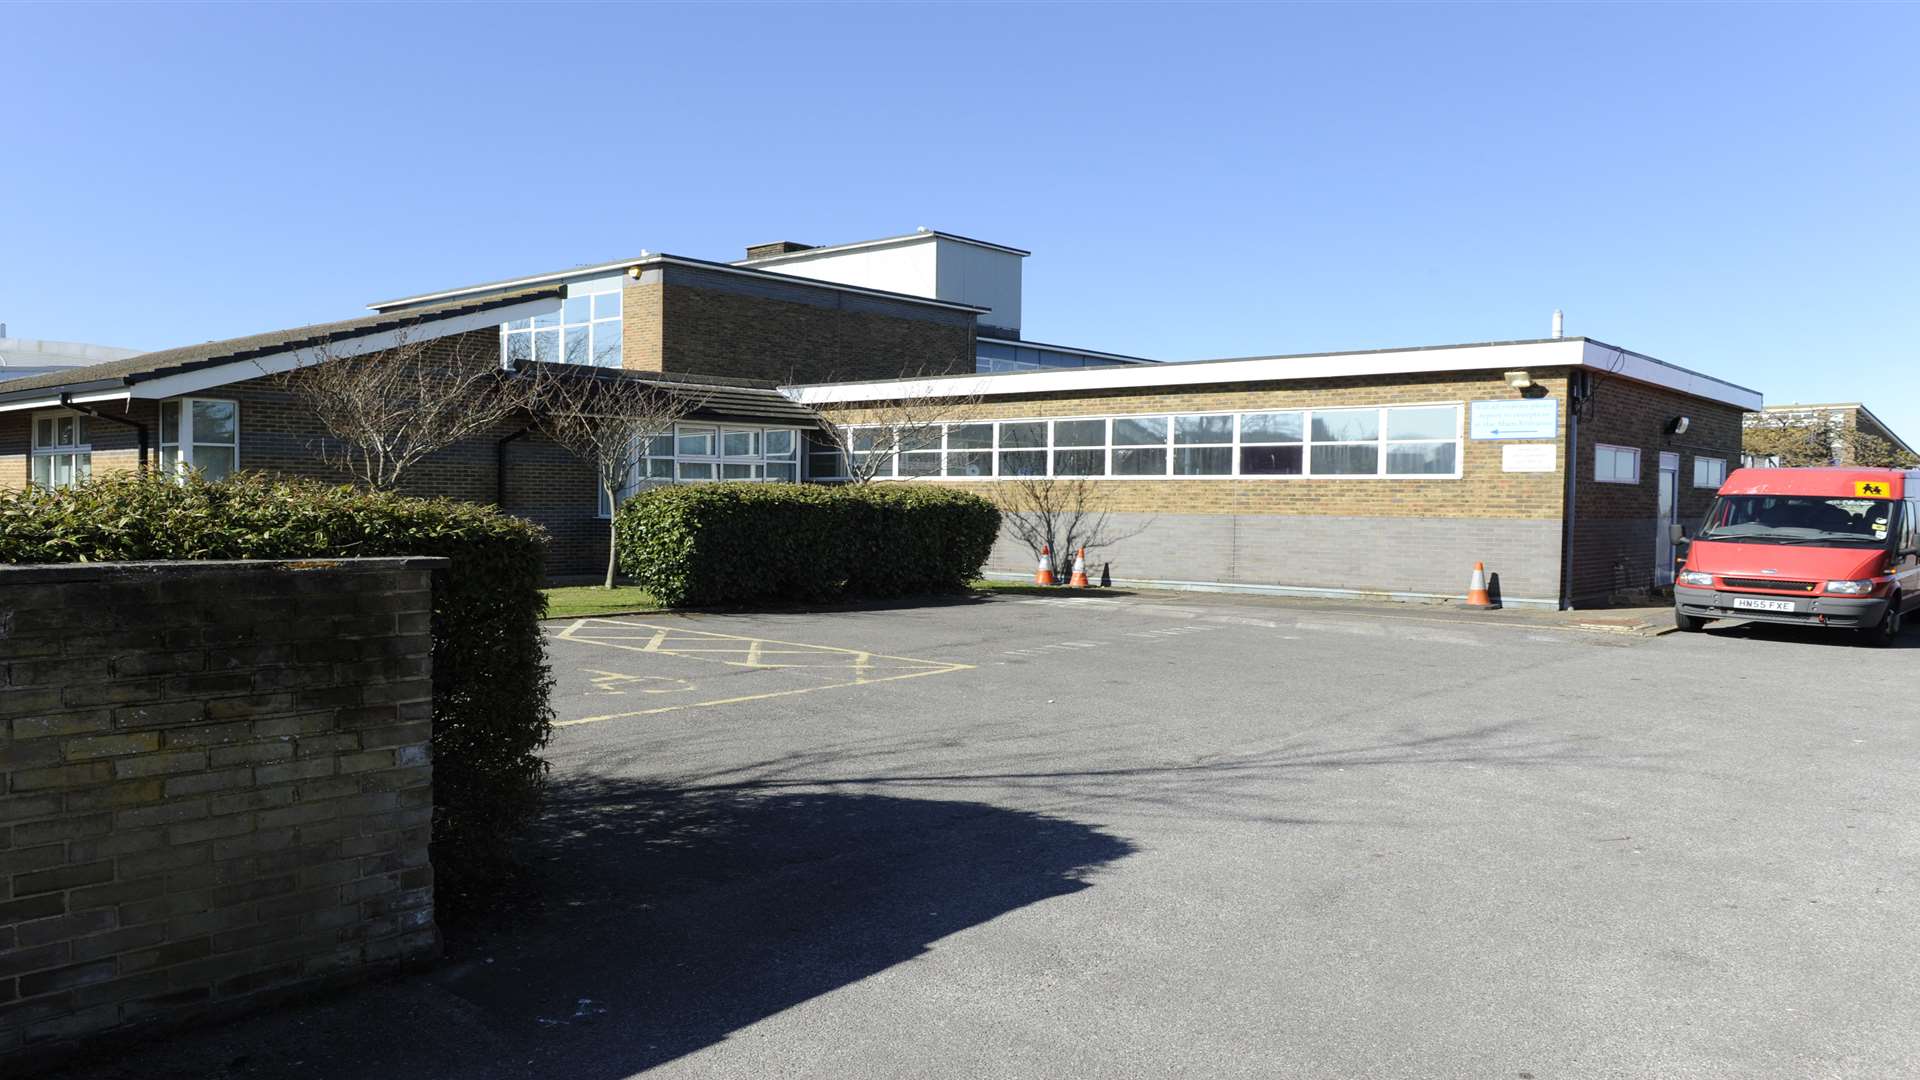 The Walmer site could become home to up to 120 Year 7 pupils from September 2019 to September 2020